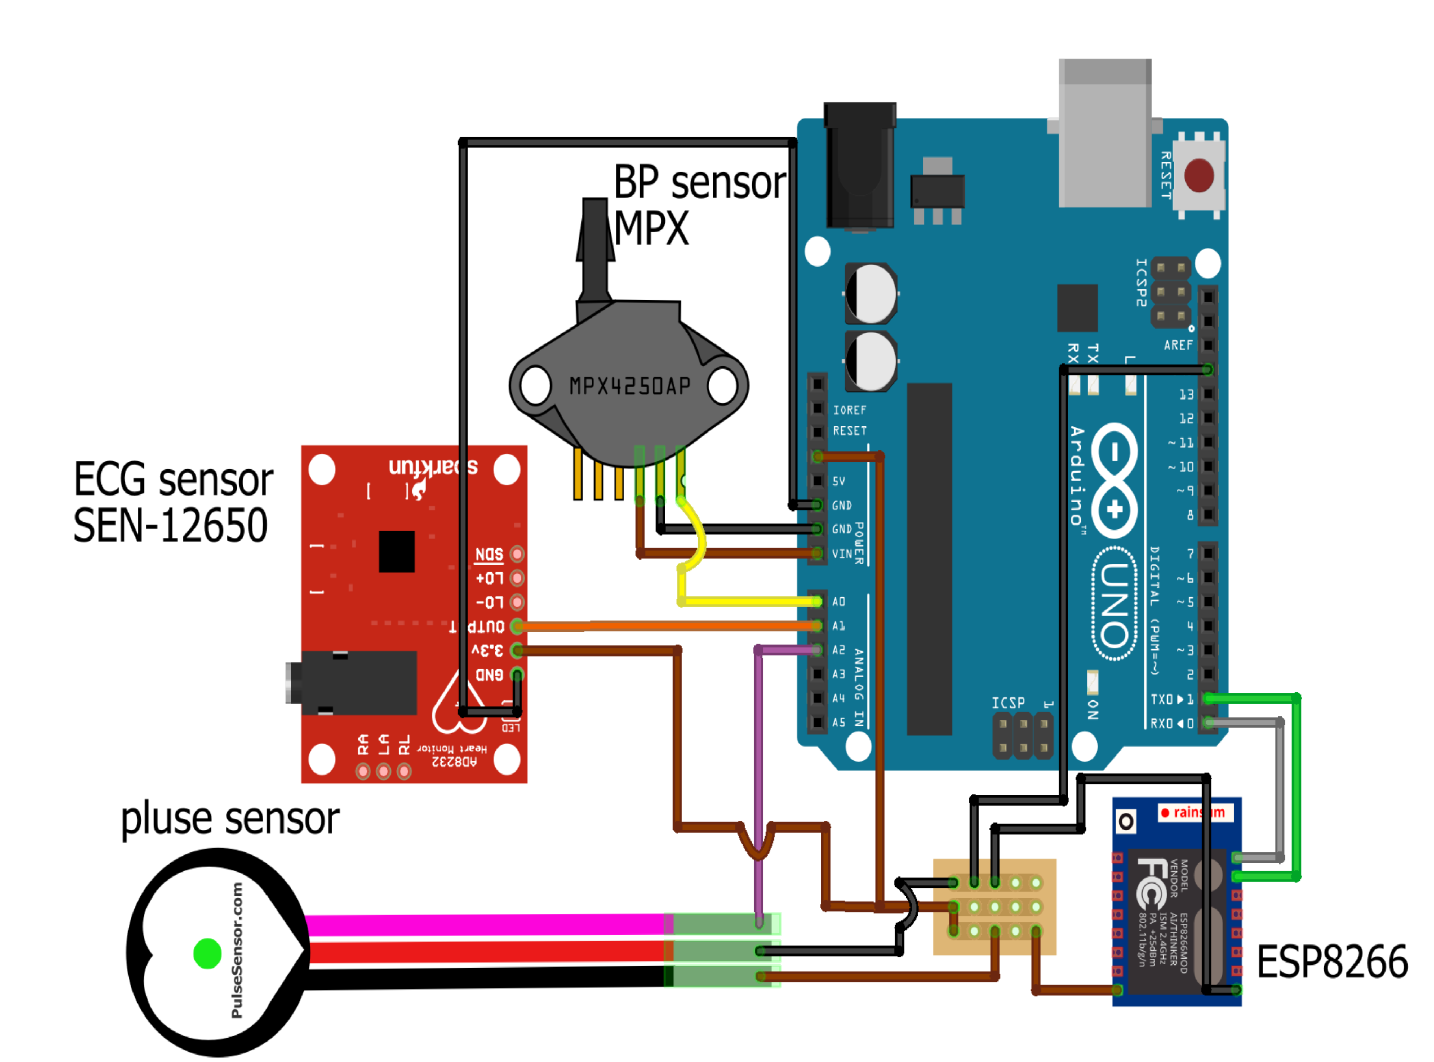 Circuit diagram IoT Connected Healthcare Applications using Arduino with ESP8266